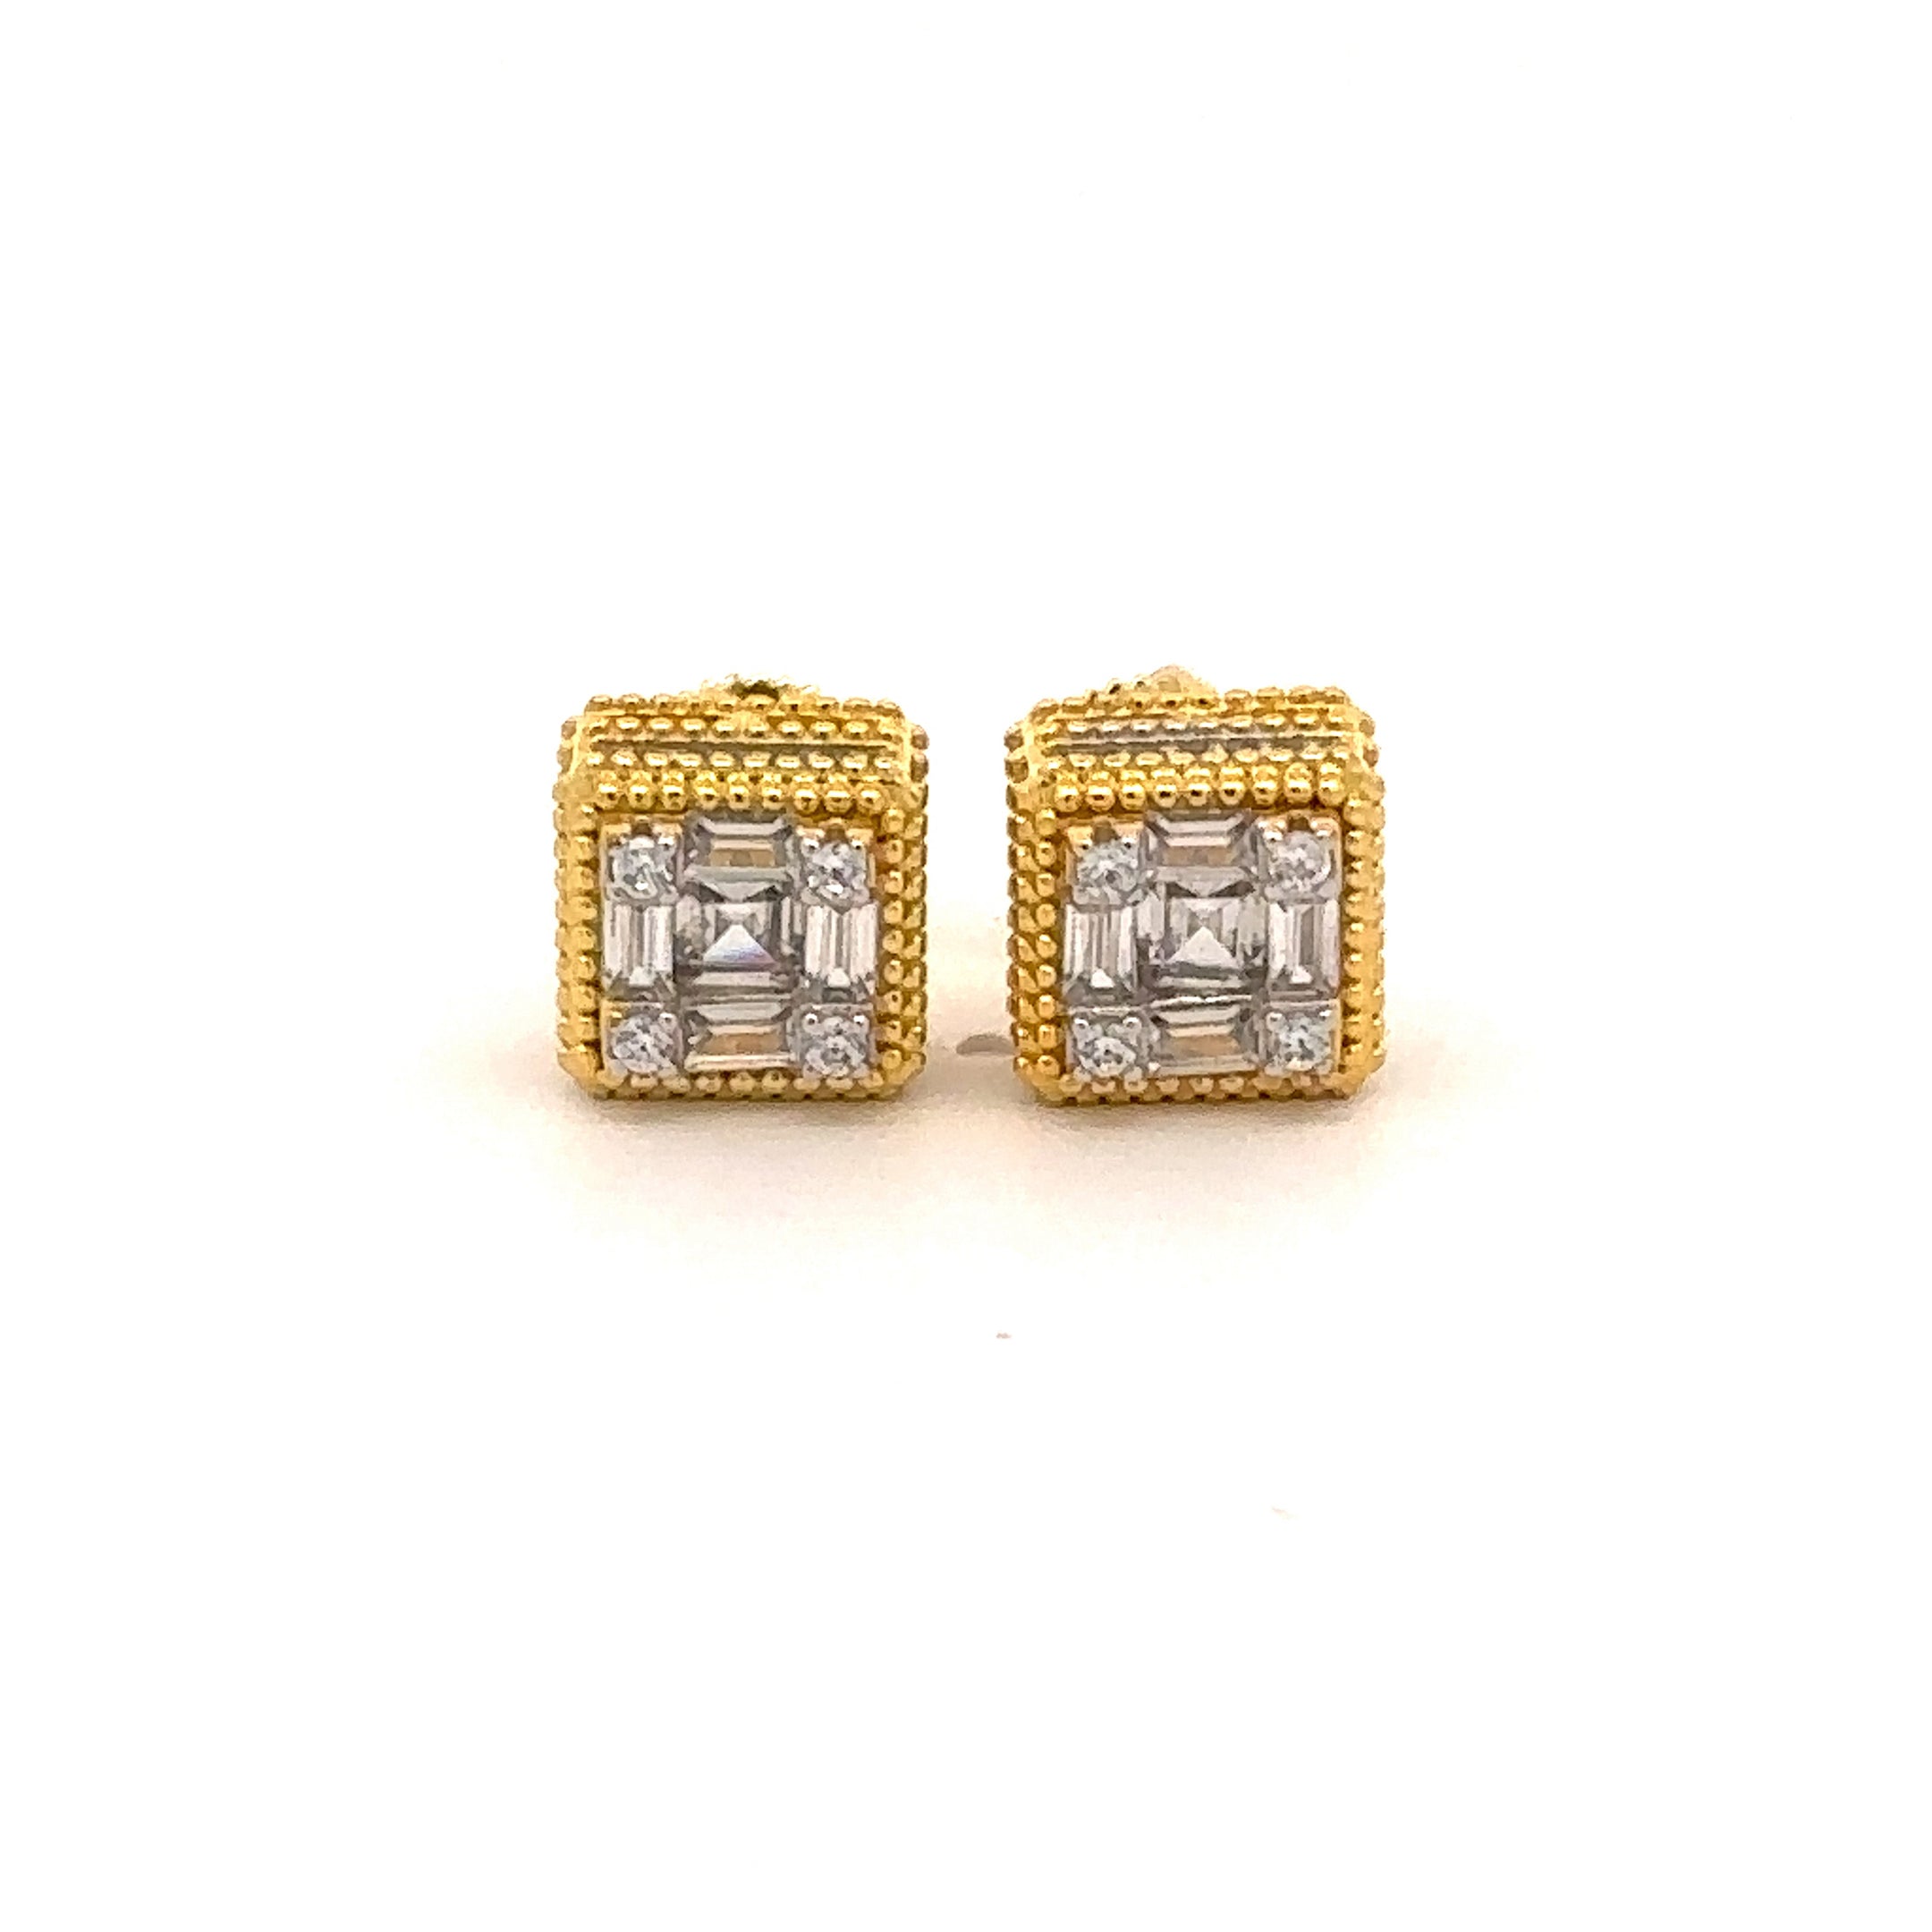 NYXARIS 925 CZ GOLD ICED OUT EARRINGS | 9219692